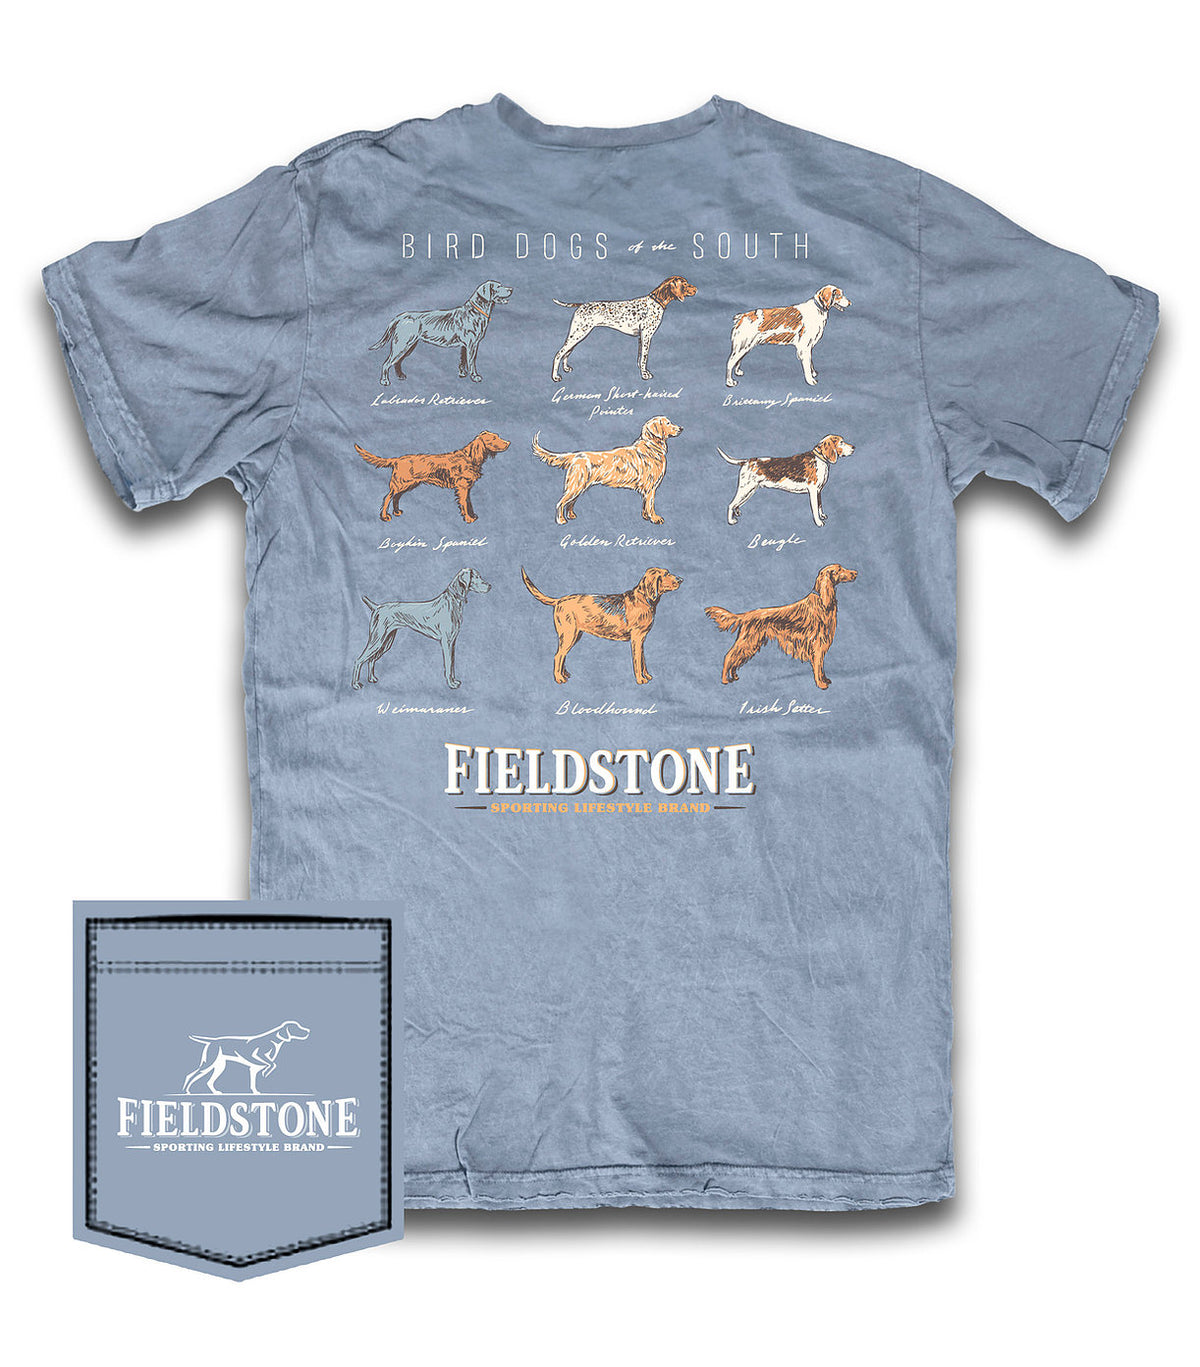 FieldStone Dogs of the South T-Shirt